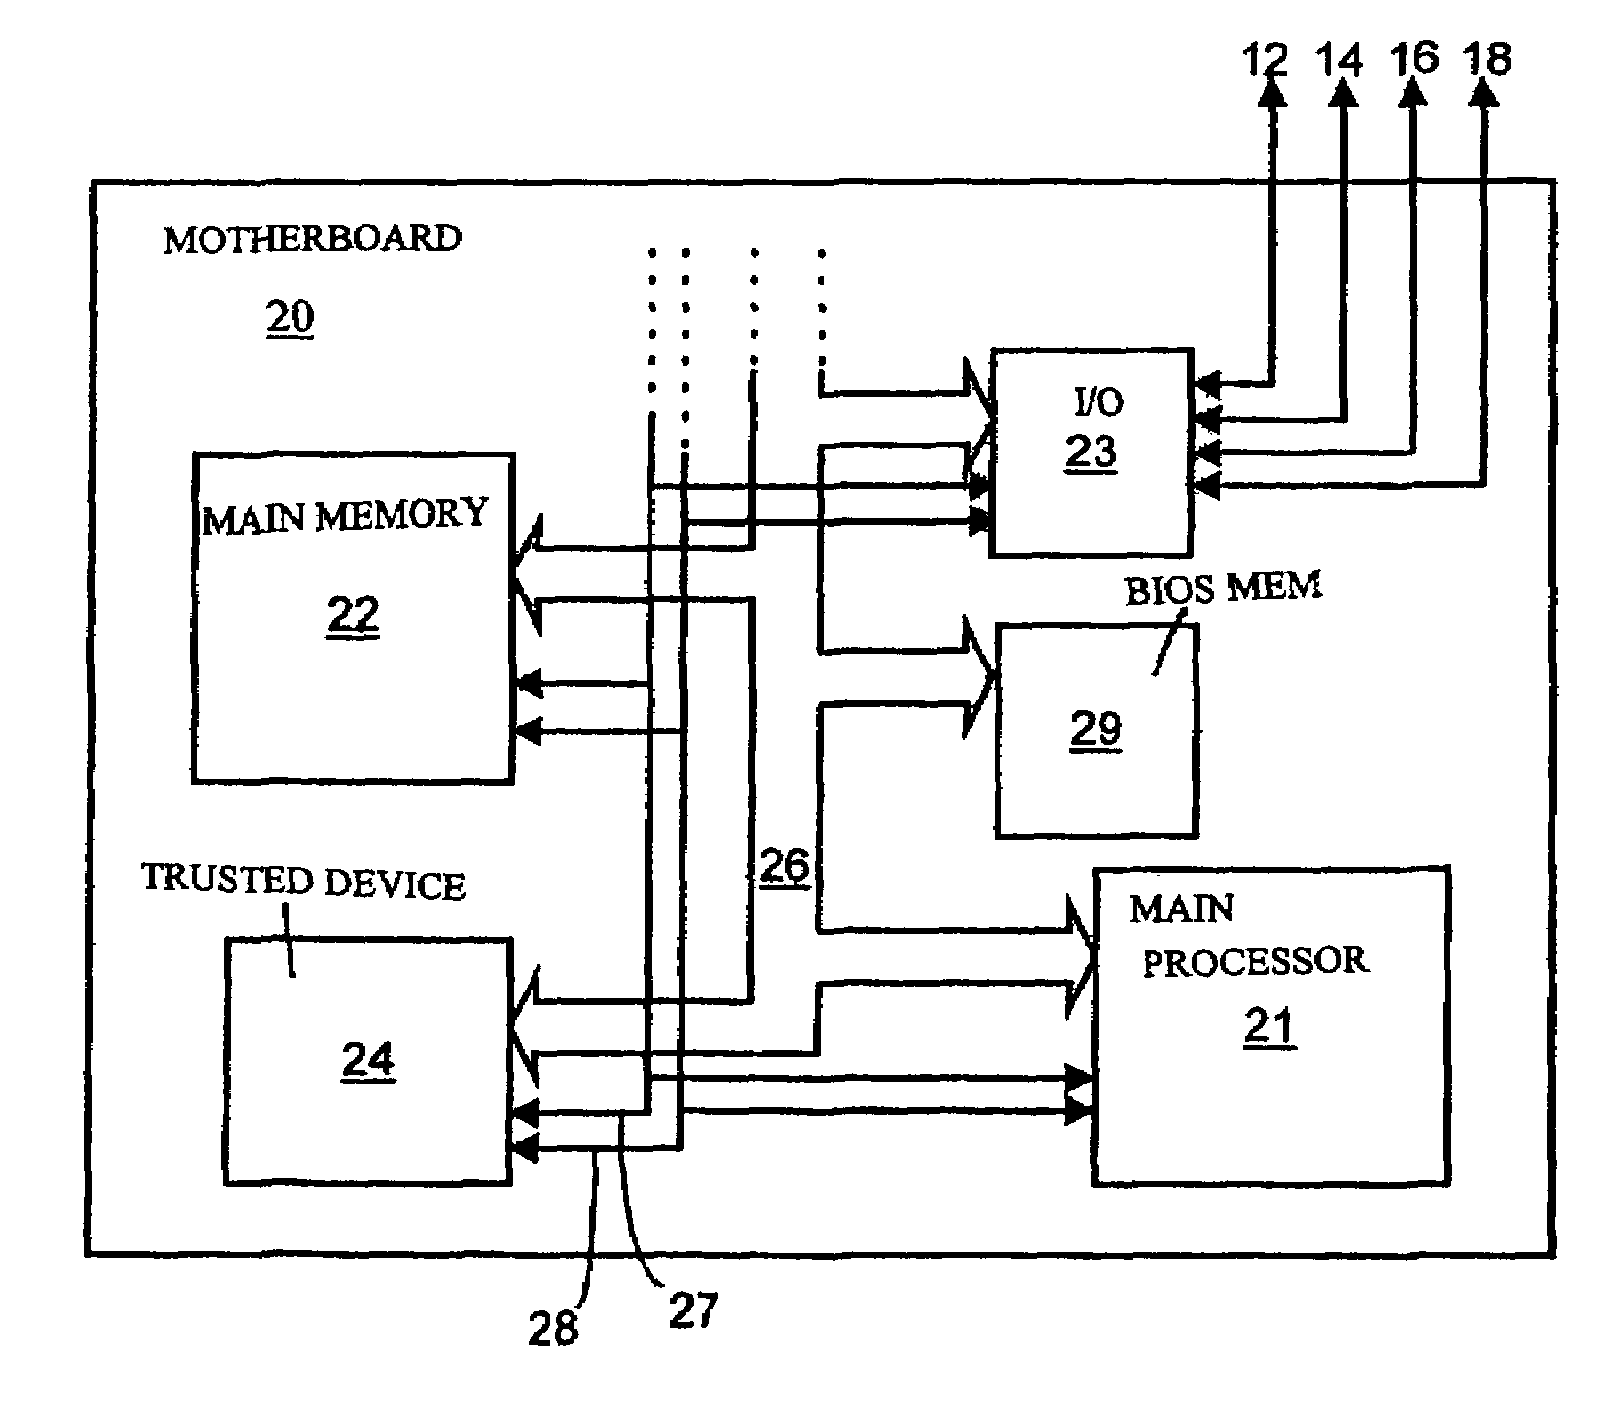 Protection of the configuration of modules in computing apparatus